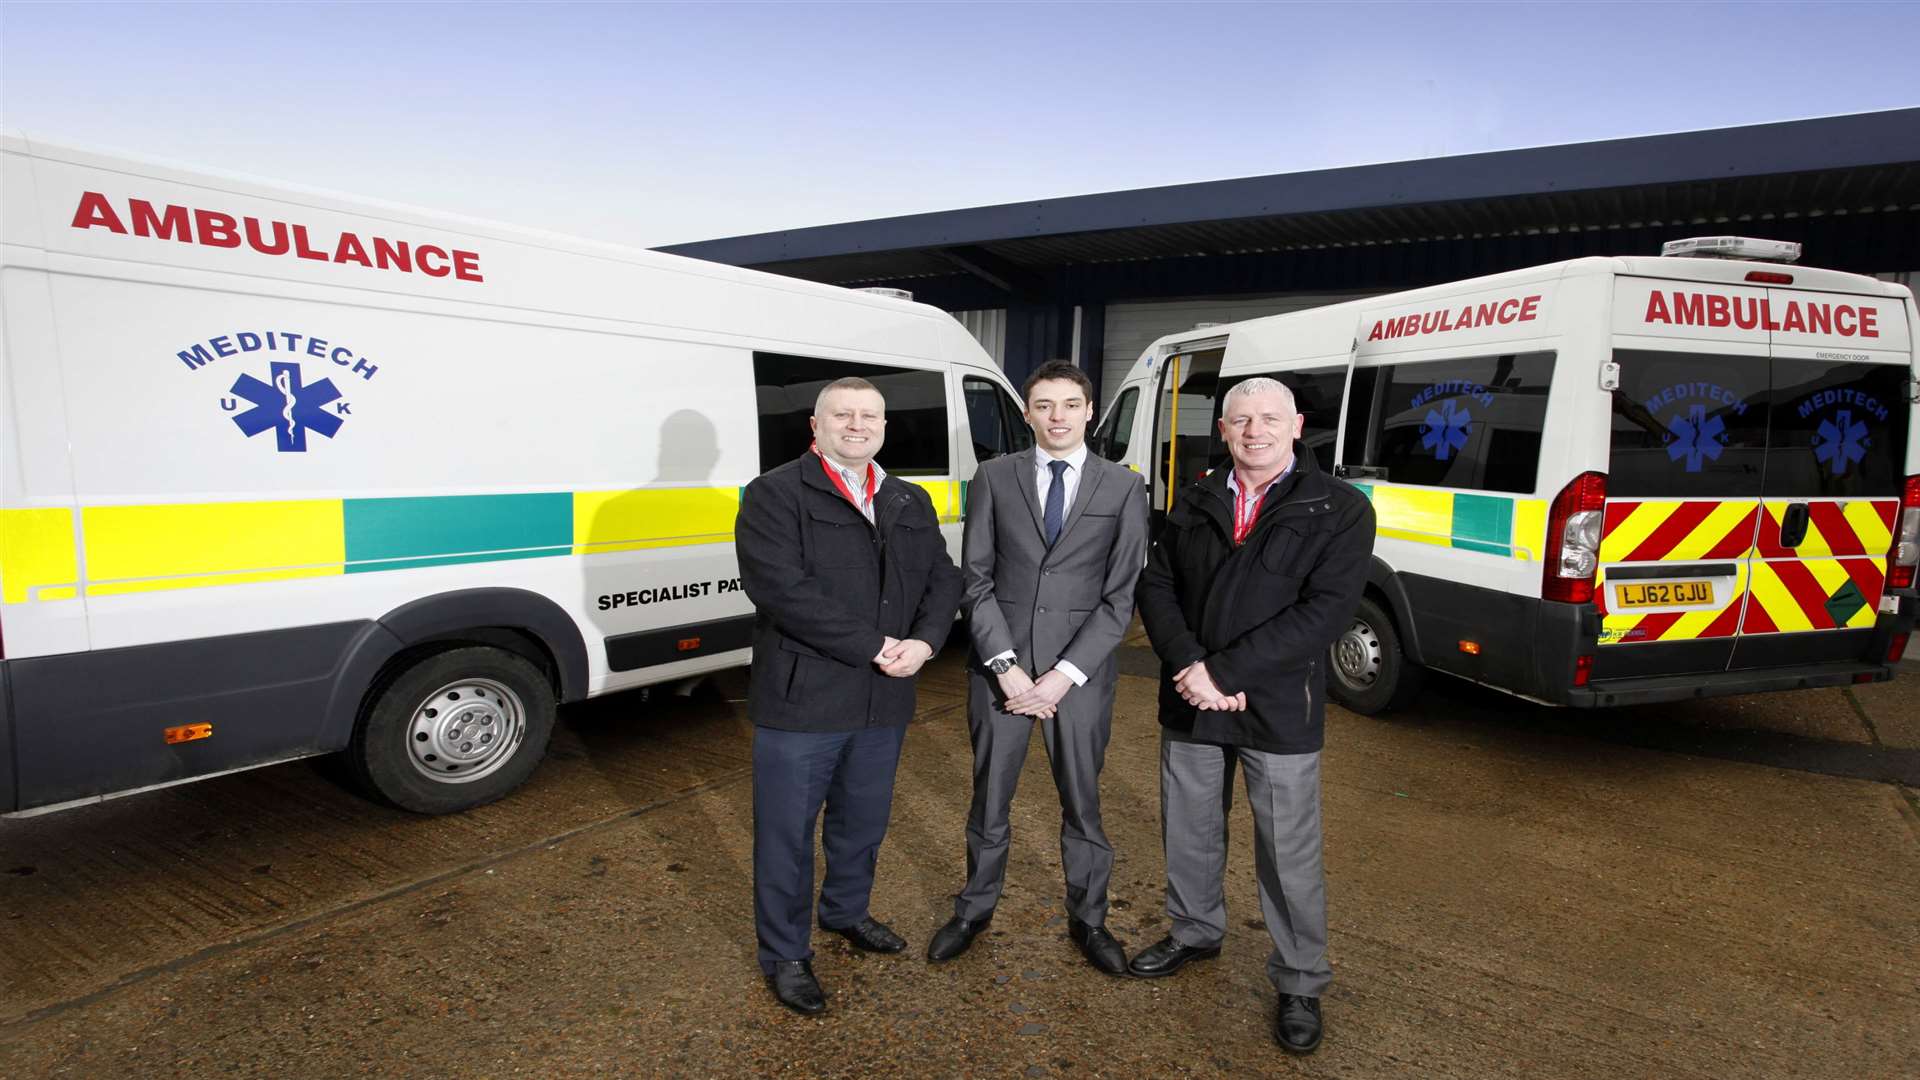 In happier times, Meditech UK Ambulance Service co-founders Paul Bleach, left and Nigel Patton, right, who sold the company in June, flank Lloyds relationship manager Ian Jobson after securing funding in 2013